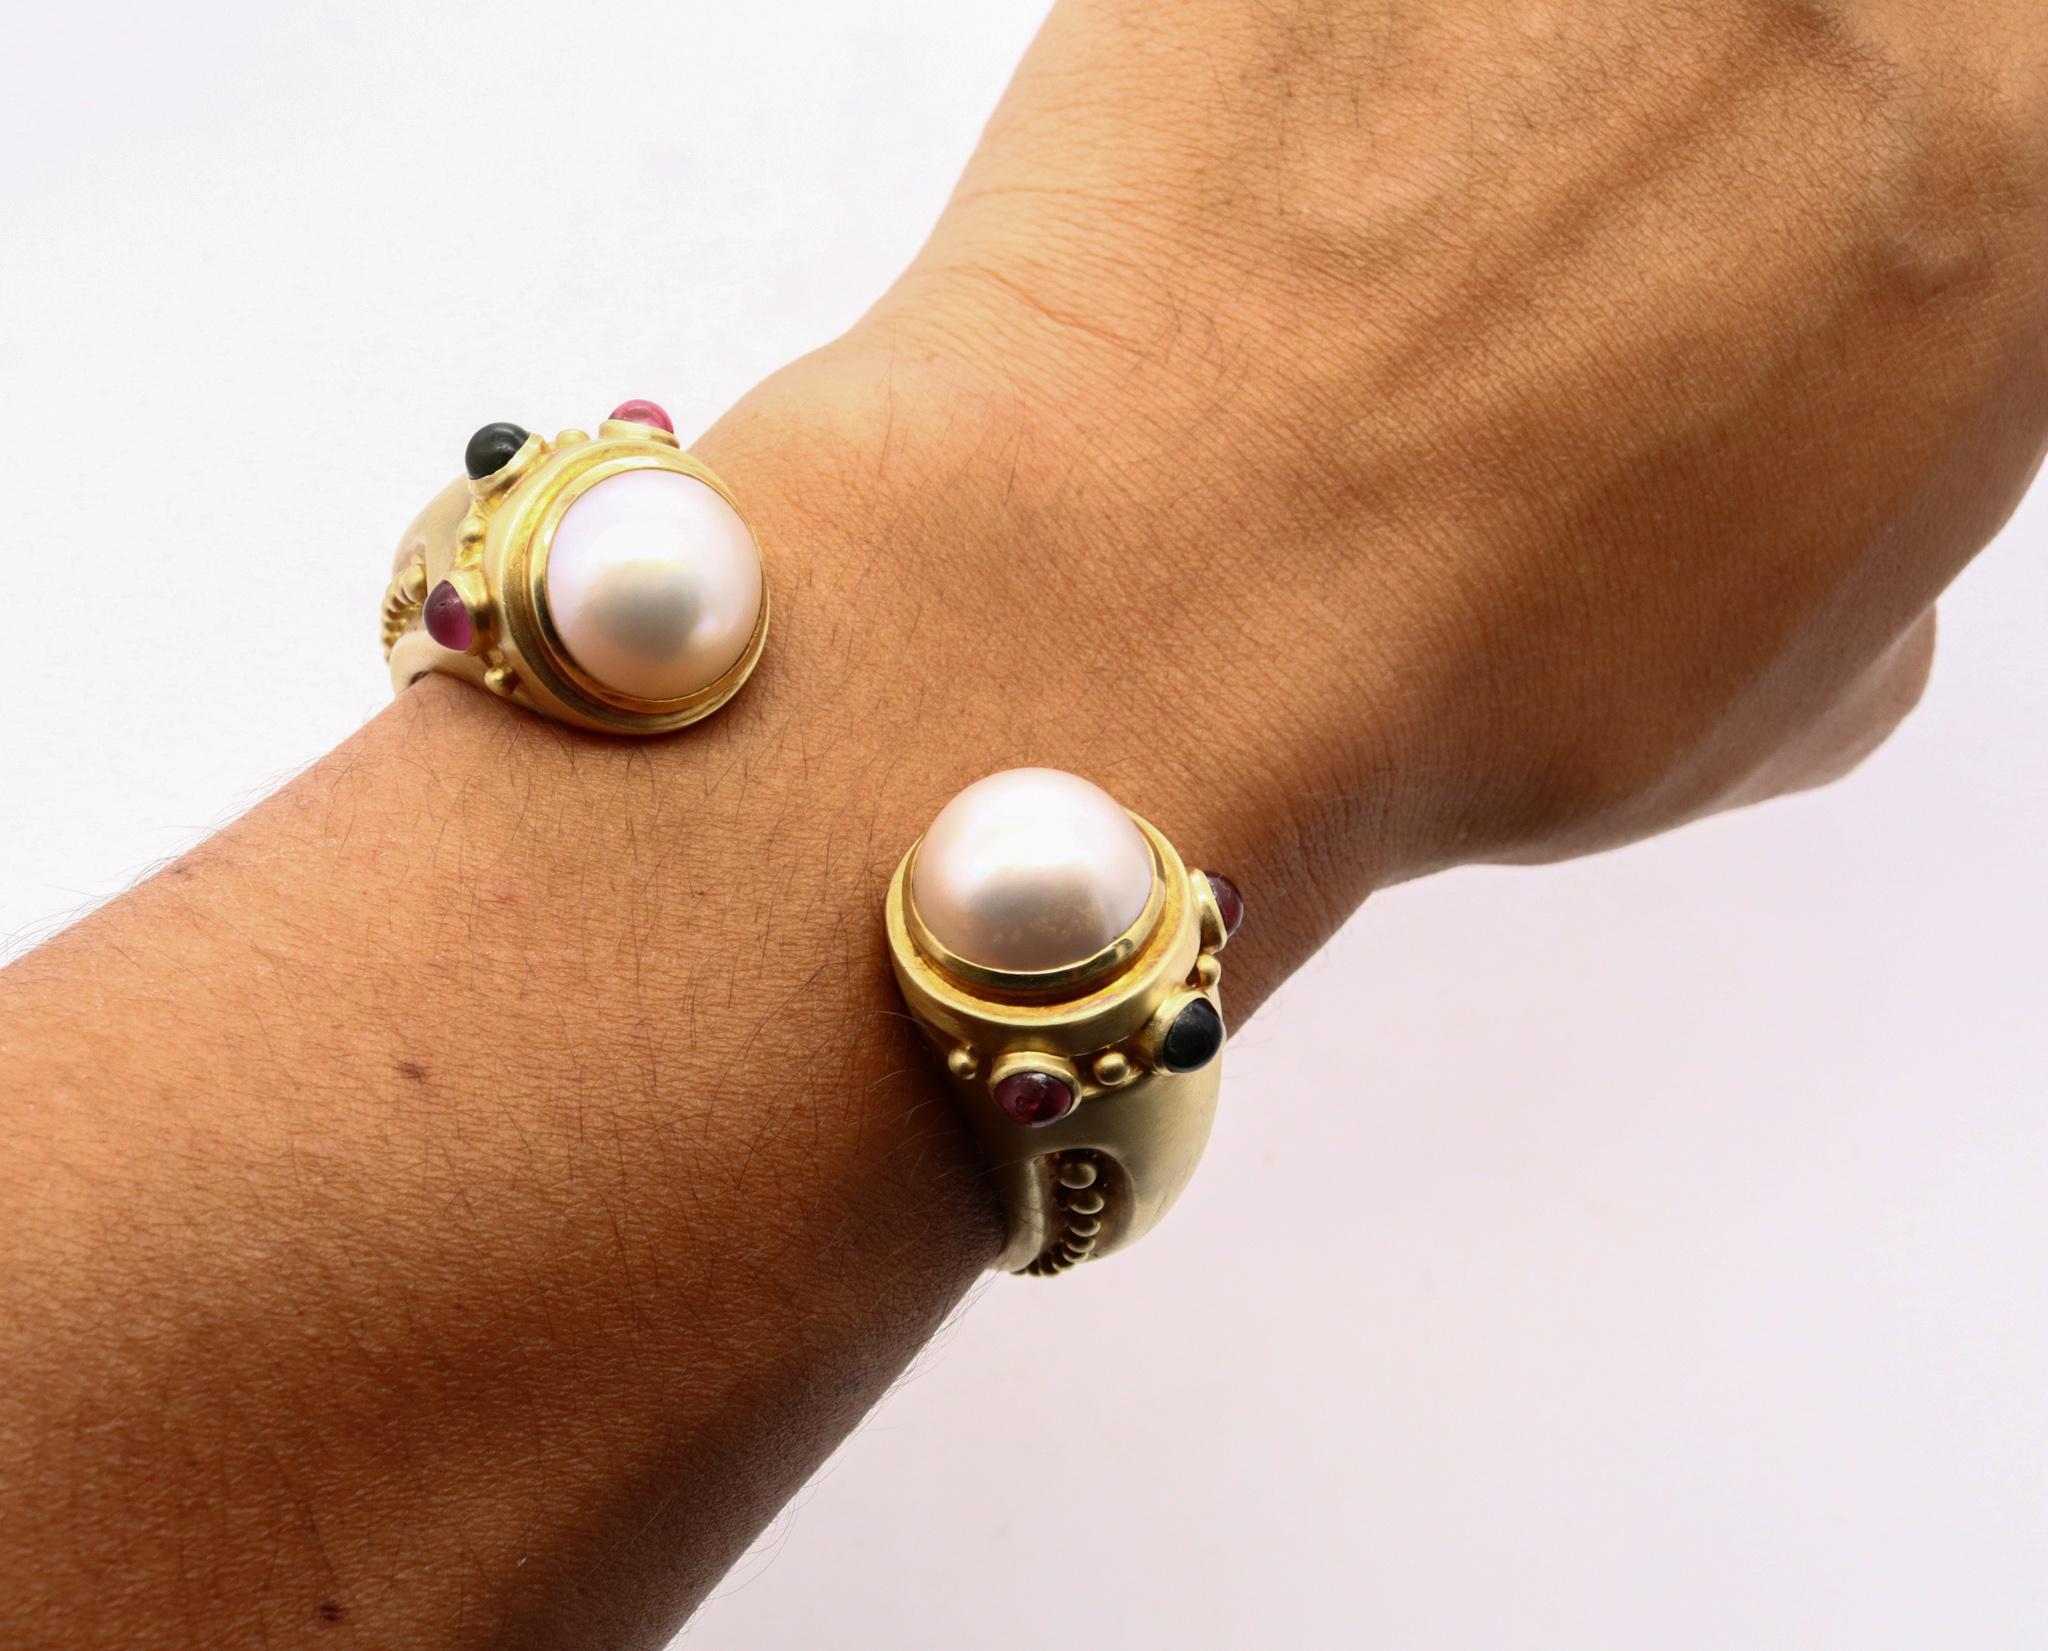 Etruscan Revival Marlene Stowe Cuff Bracelet in 18Kt Brushed Gold with Mabe Pearls and Tourmaline For Sale